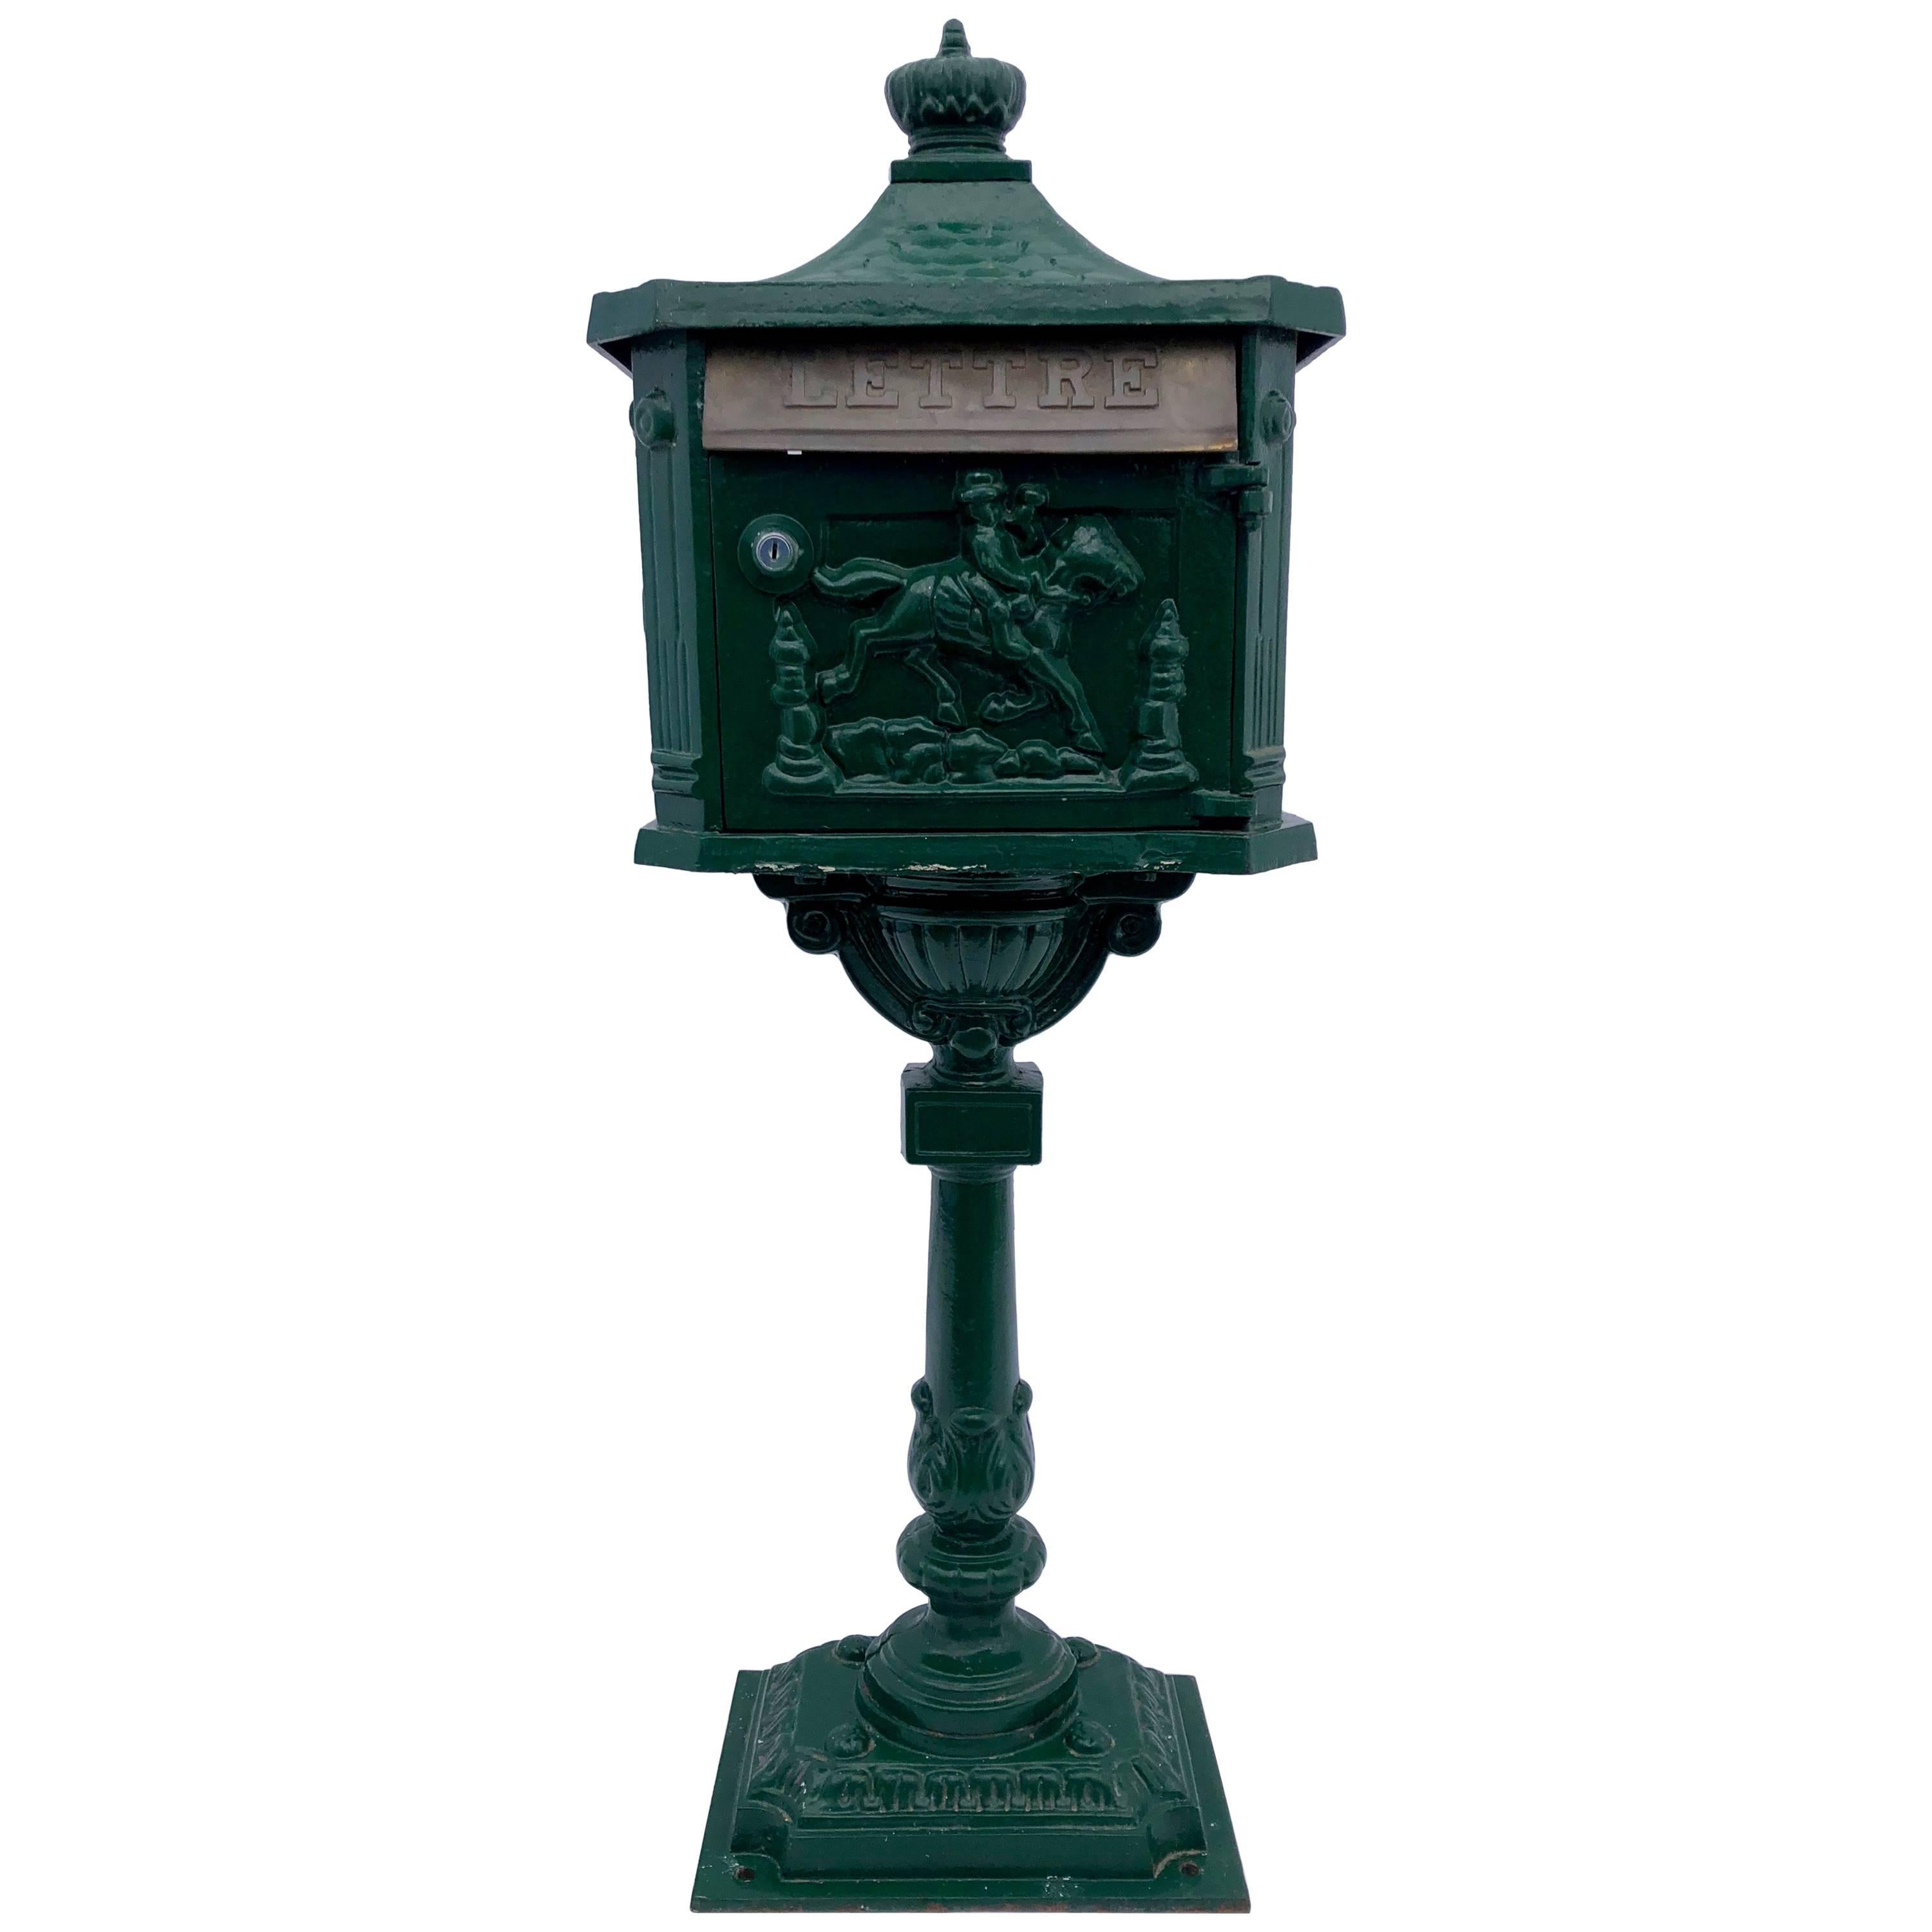 French Antique Cast Iron Standing Mailbox with Slot Marked "Lettres" 1900s